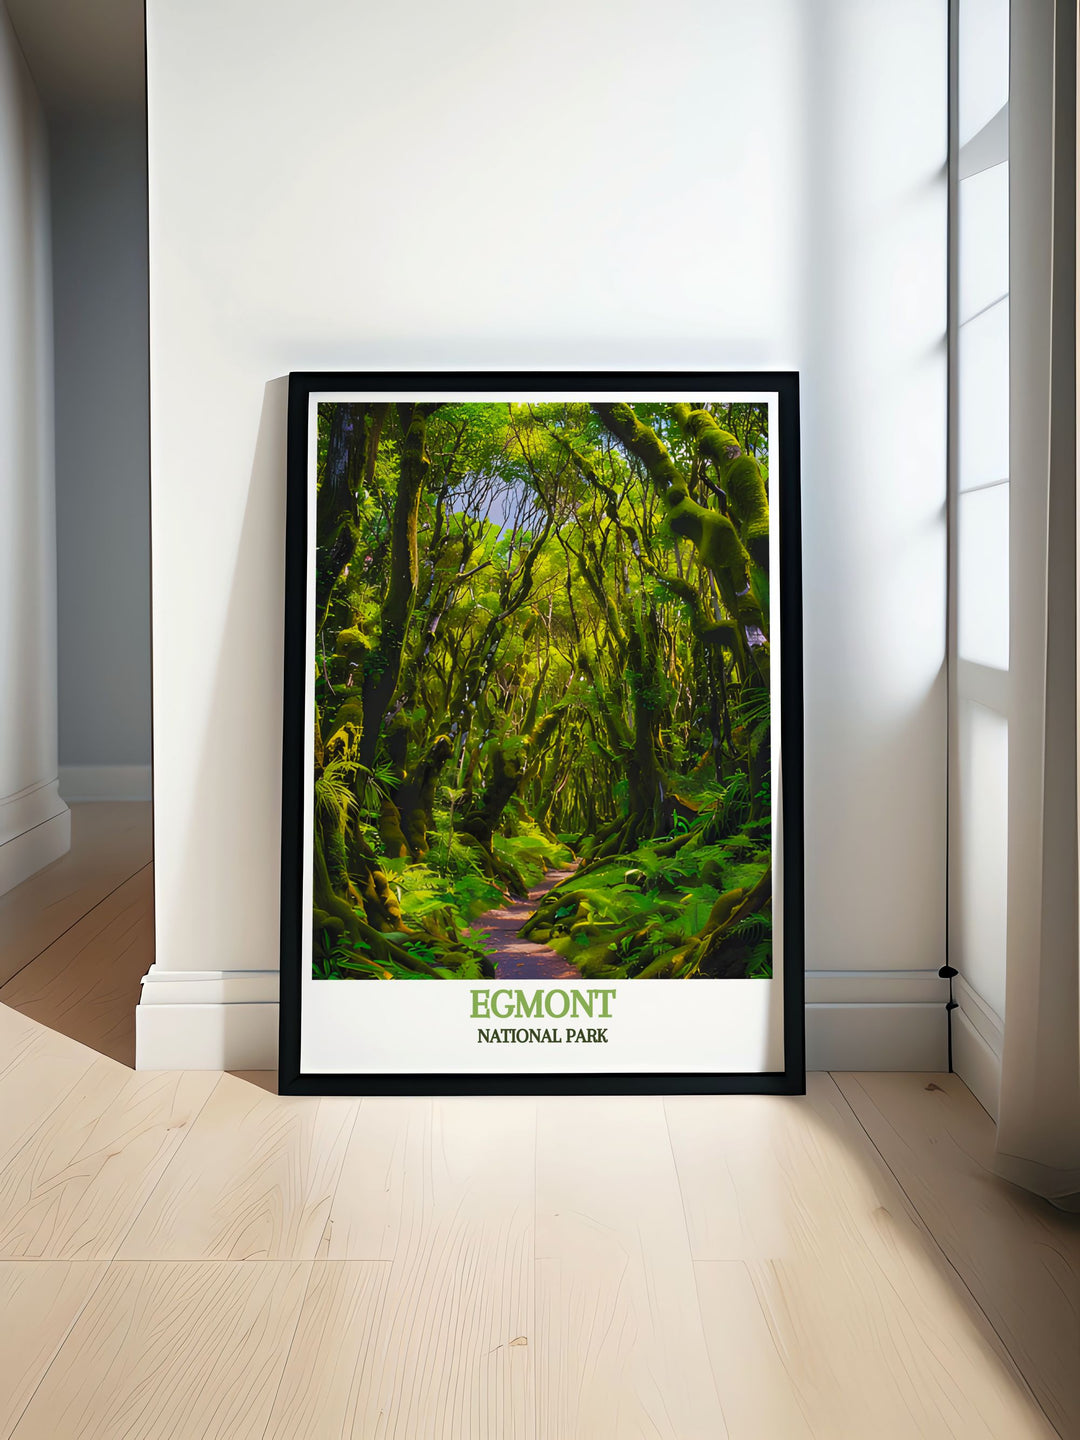 A detailed illustration of Egmont National Park, highlighting the lush Goblin Forest and the majestic Mount Taranaki, perfect for nature lovers.